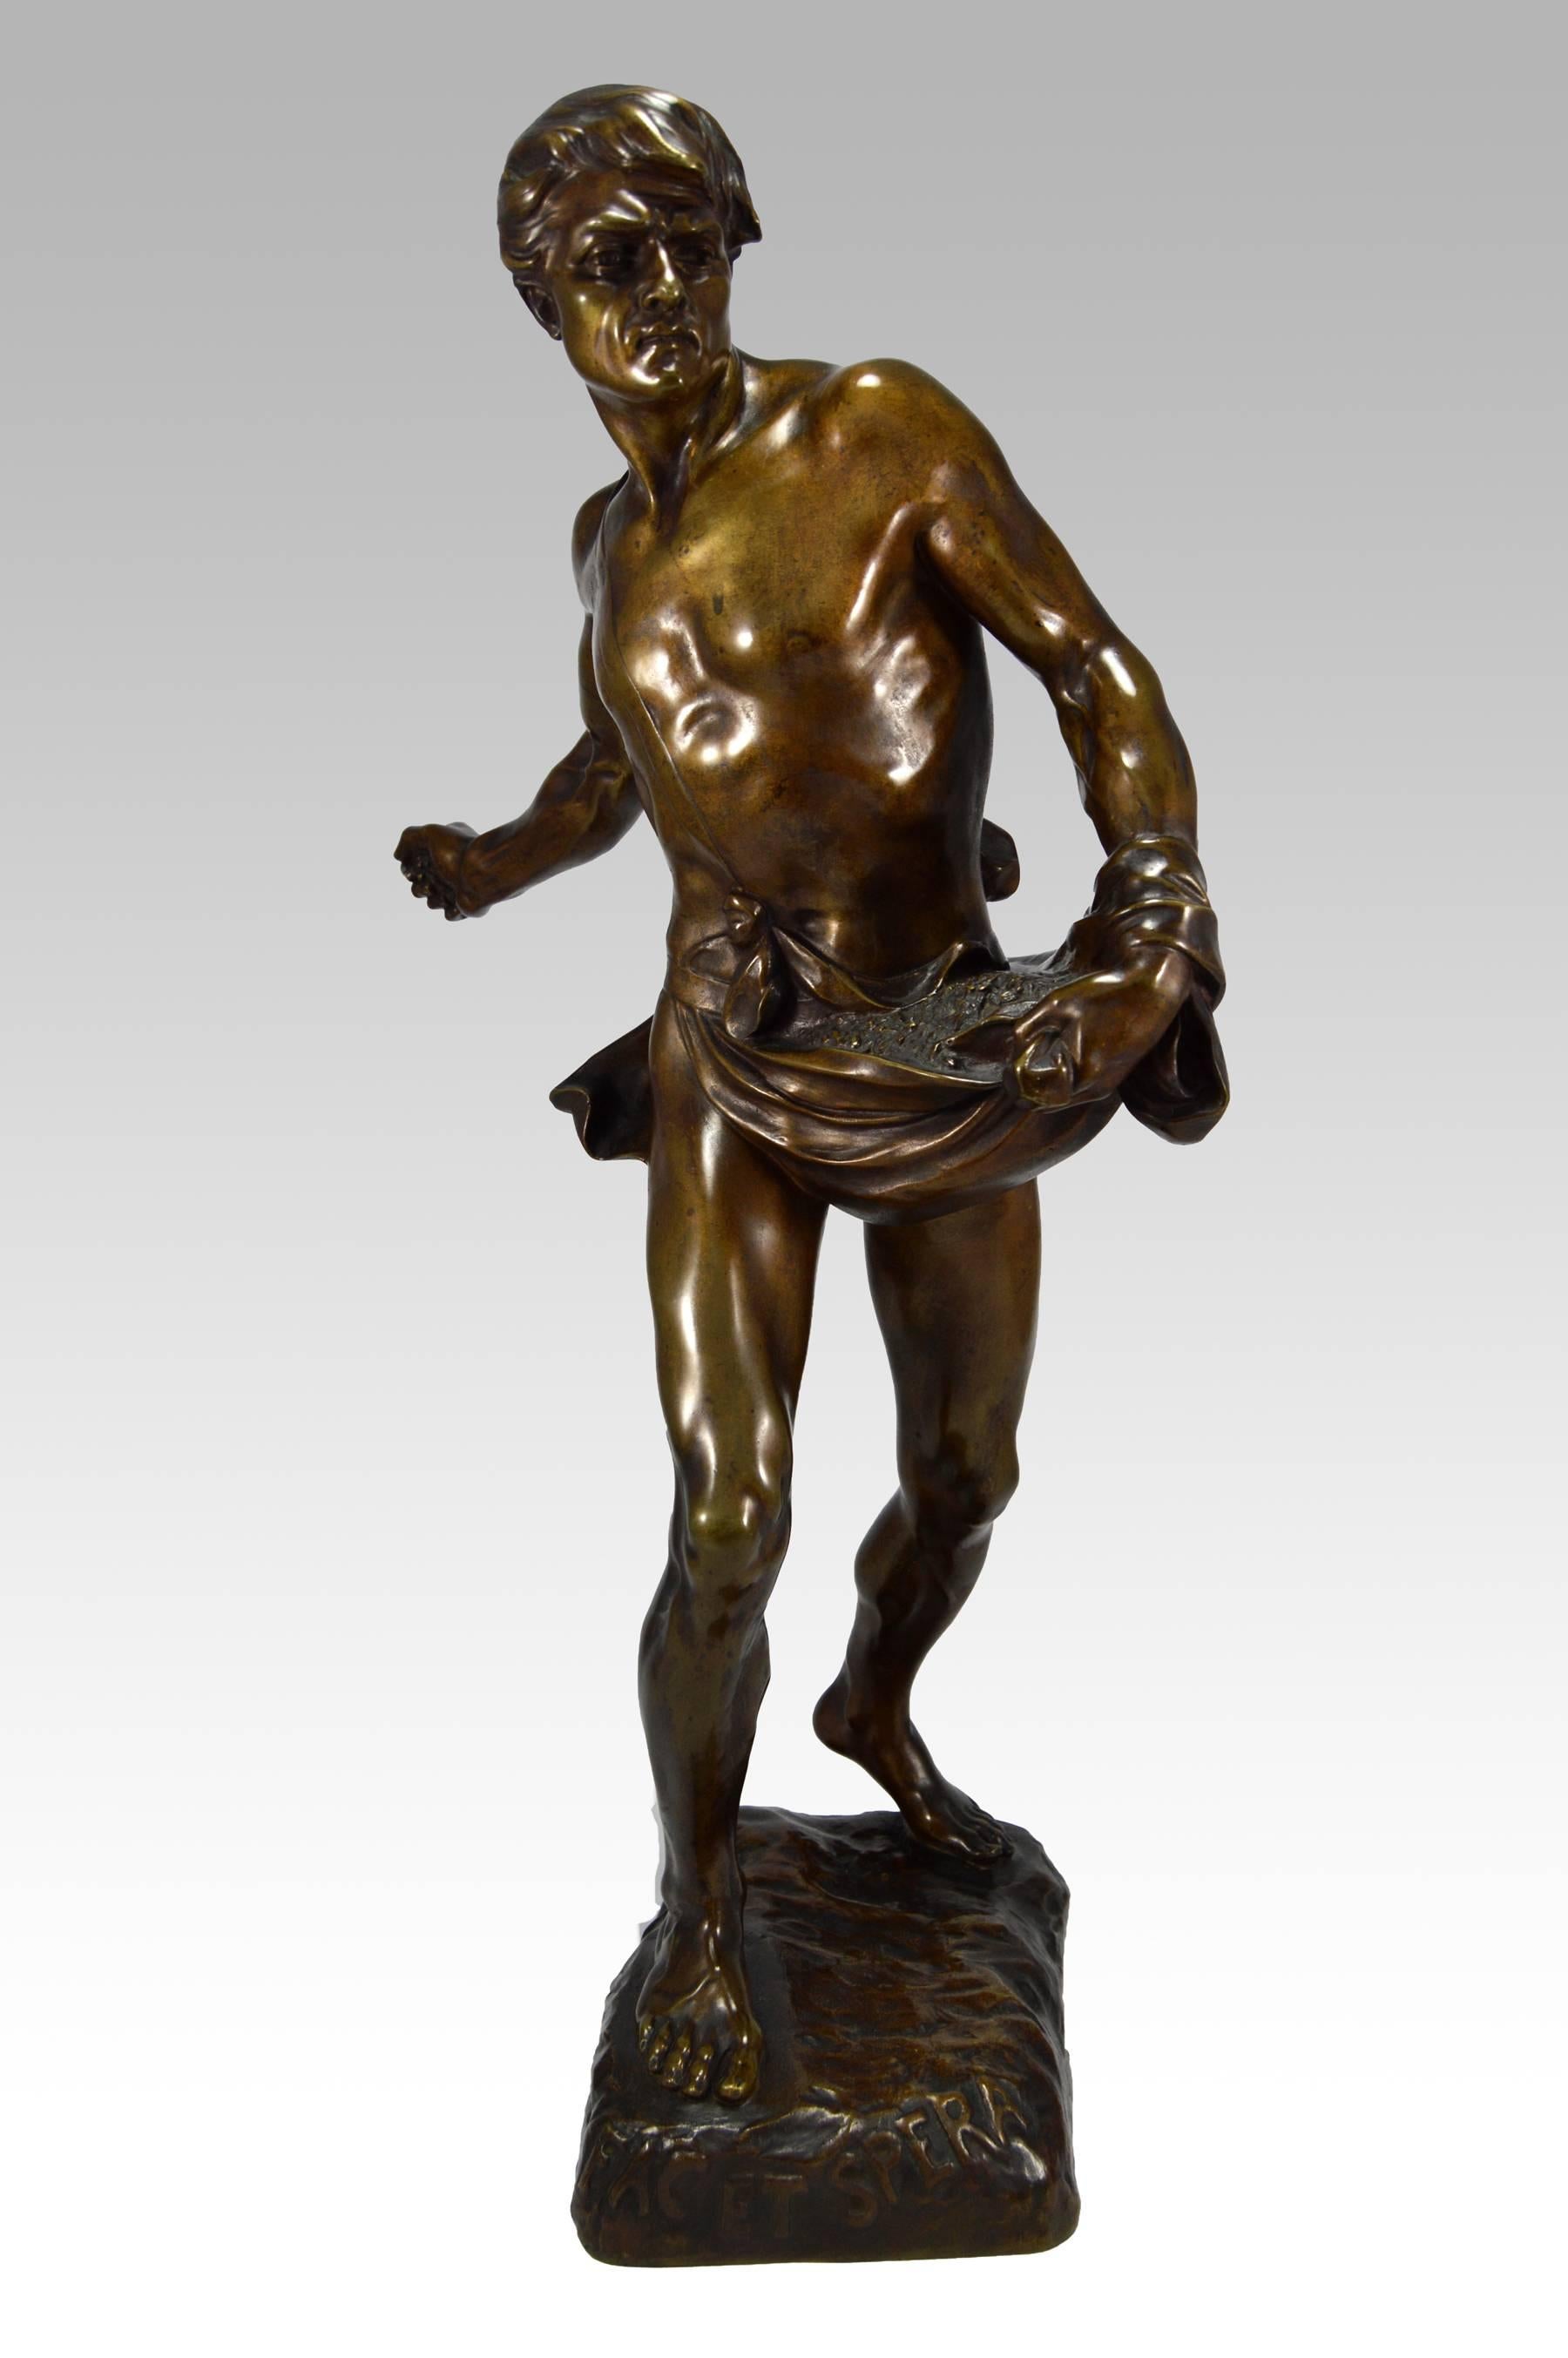 19th Century French bronze sculpture of a man sowing seeds